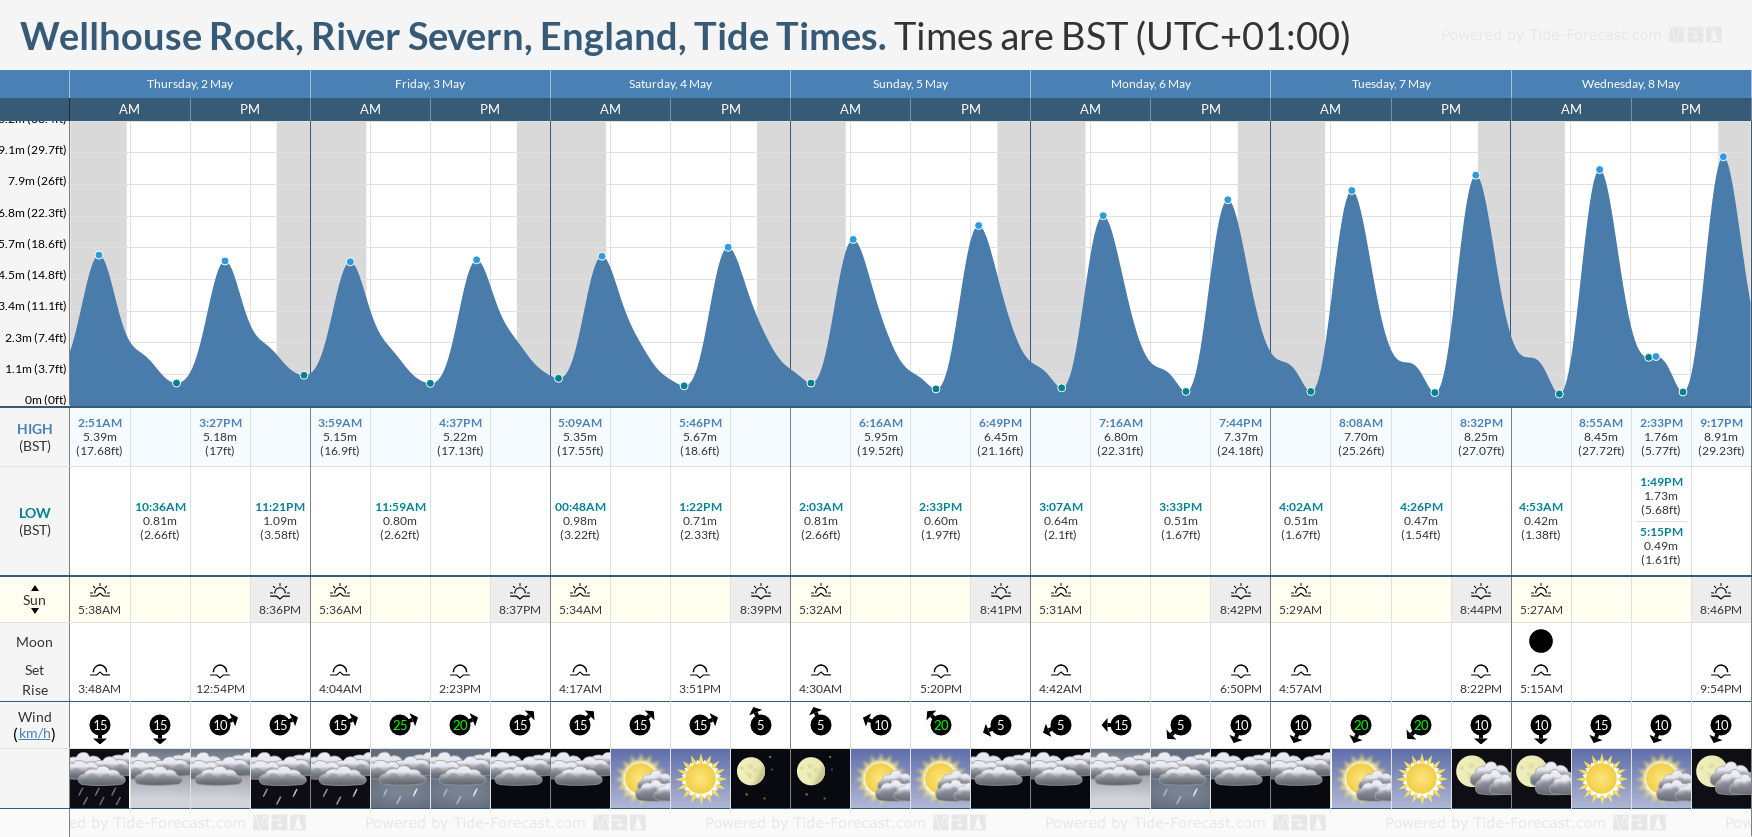 Wellhouse Rock, River Severn, England Tide Chart including high and low tide tide times for the next 7 days